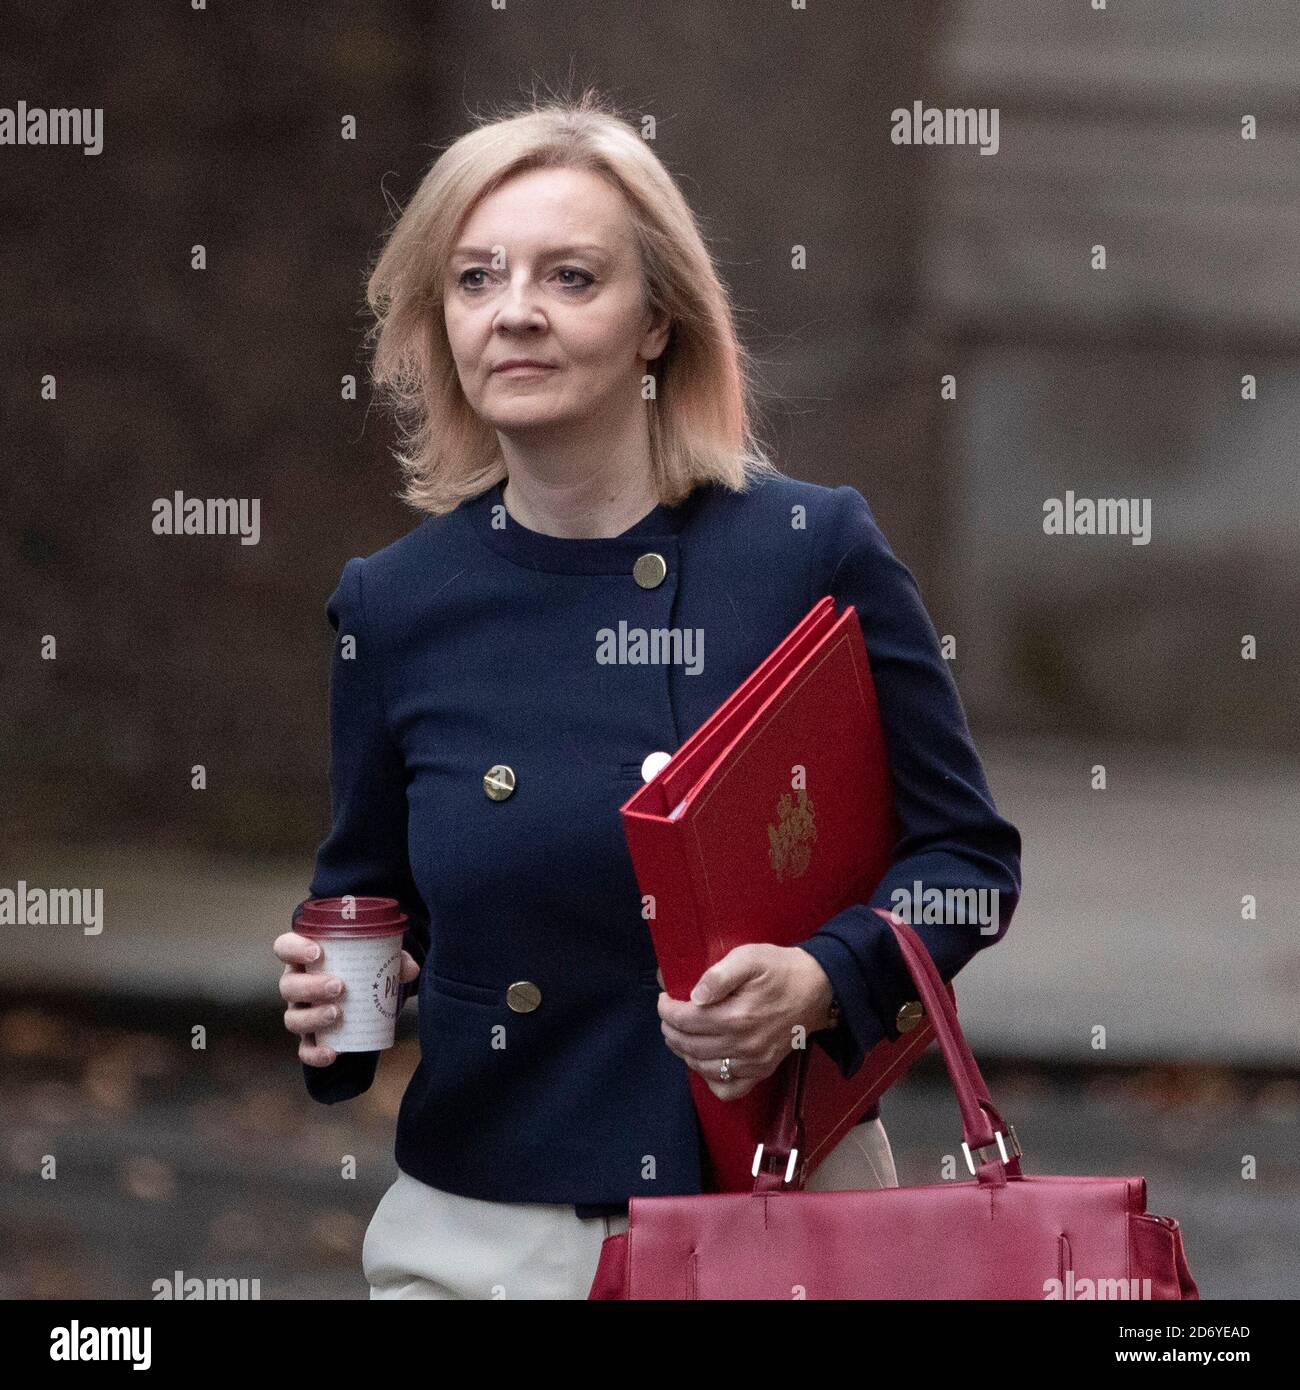 Liz Truss walks up Downing Street to a cabinet meeting on the 20th of October 2020, wearing a navy blue jacket and holding the ministers, red folder. Stock Photo